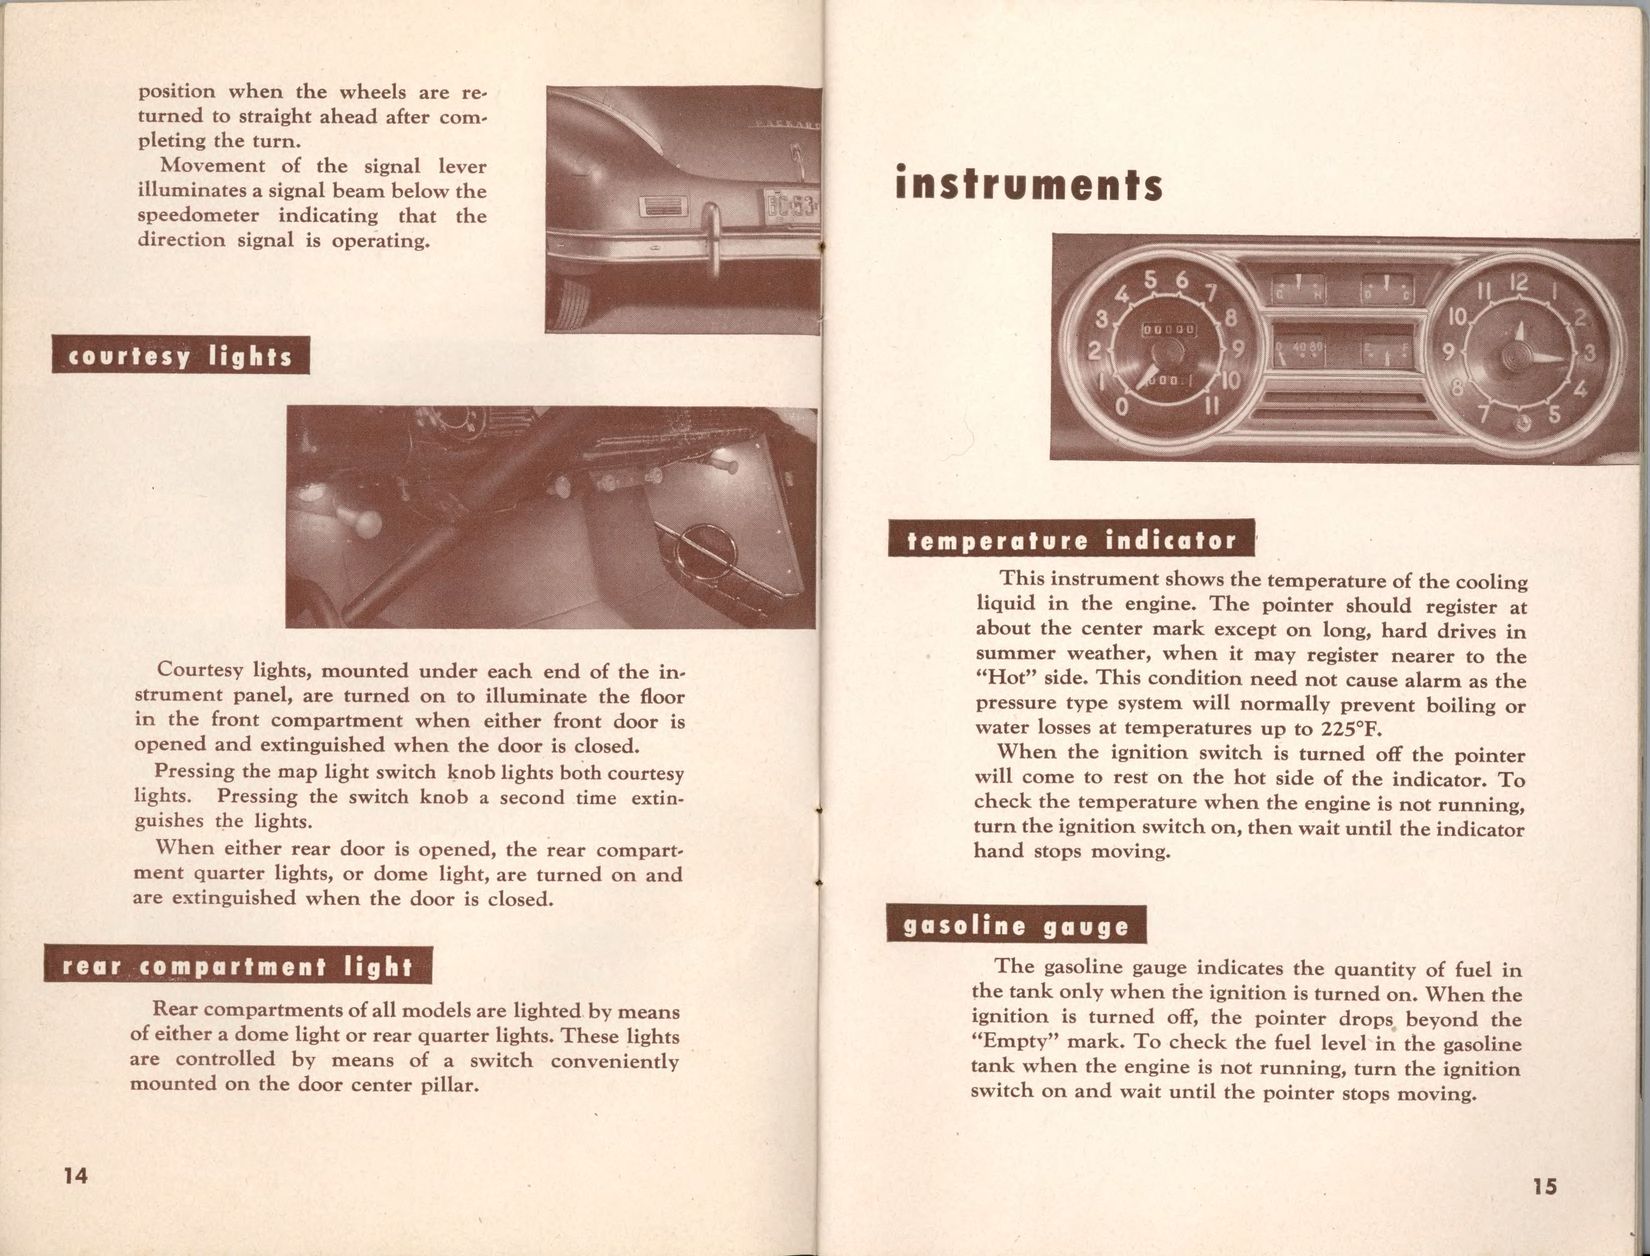 1948 Packard Owners Manual Page 2